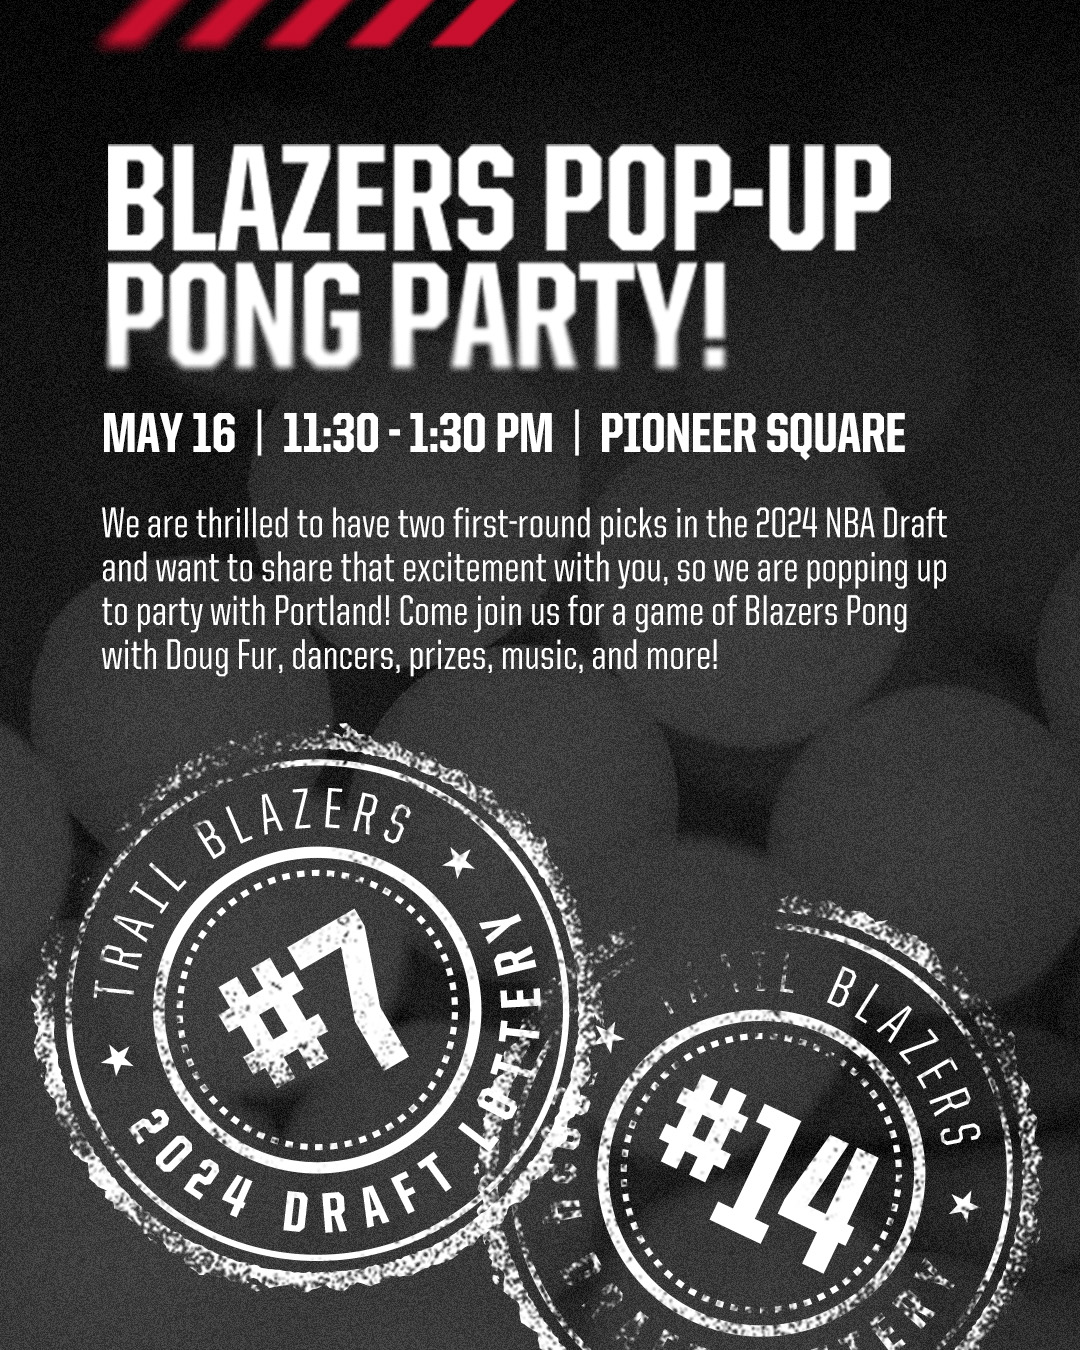 Blazers Pop-up Pong Party